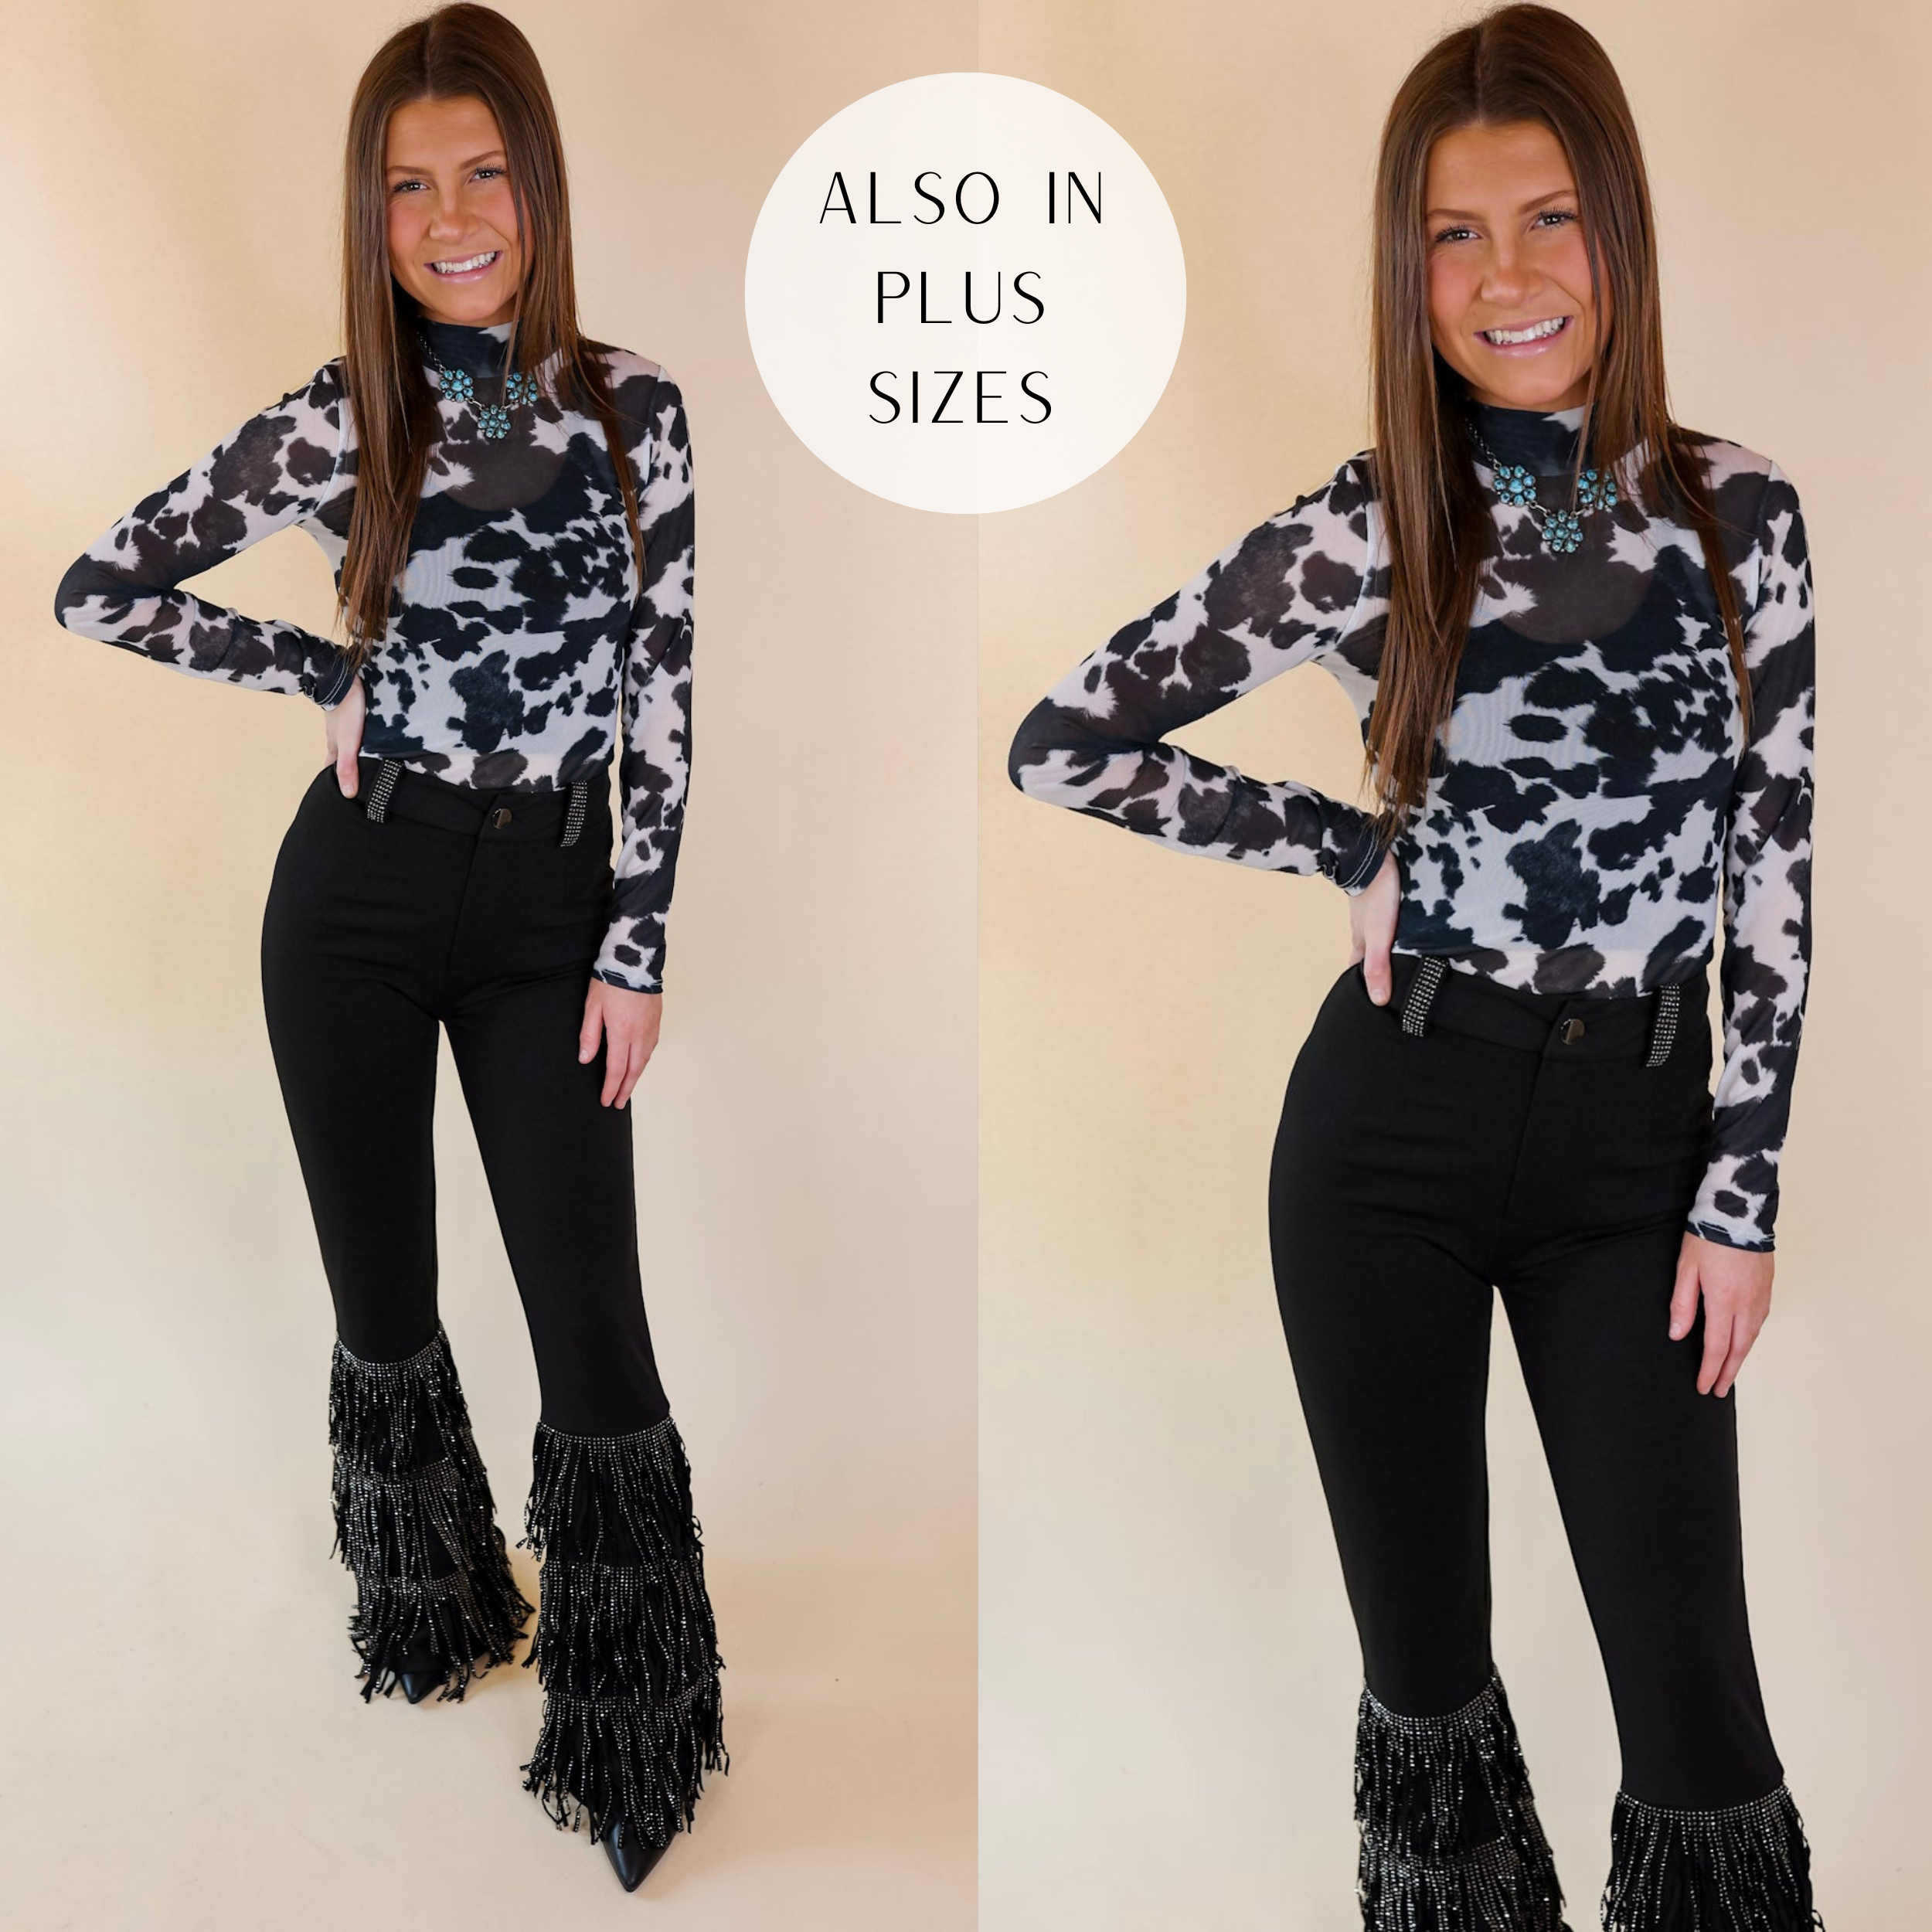 Model is wearing a long sleeve bodysuit that is a black and white cow print. Model has this long sleeve bodysuit paired with black bell bottom pants, black boots, and turquoise jewelry.